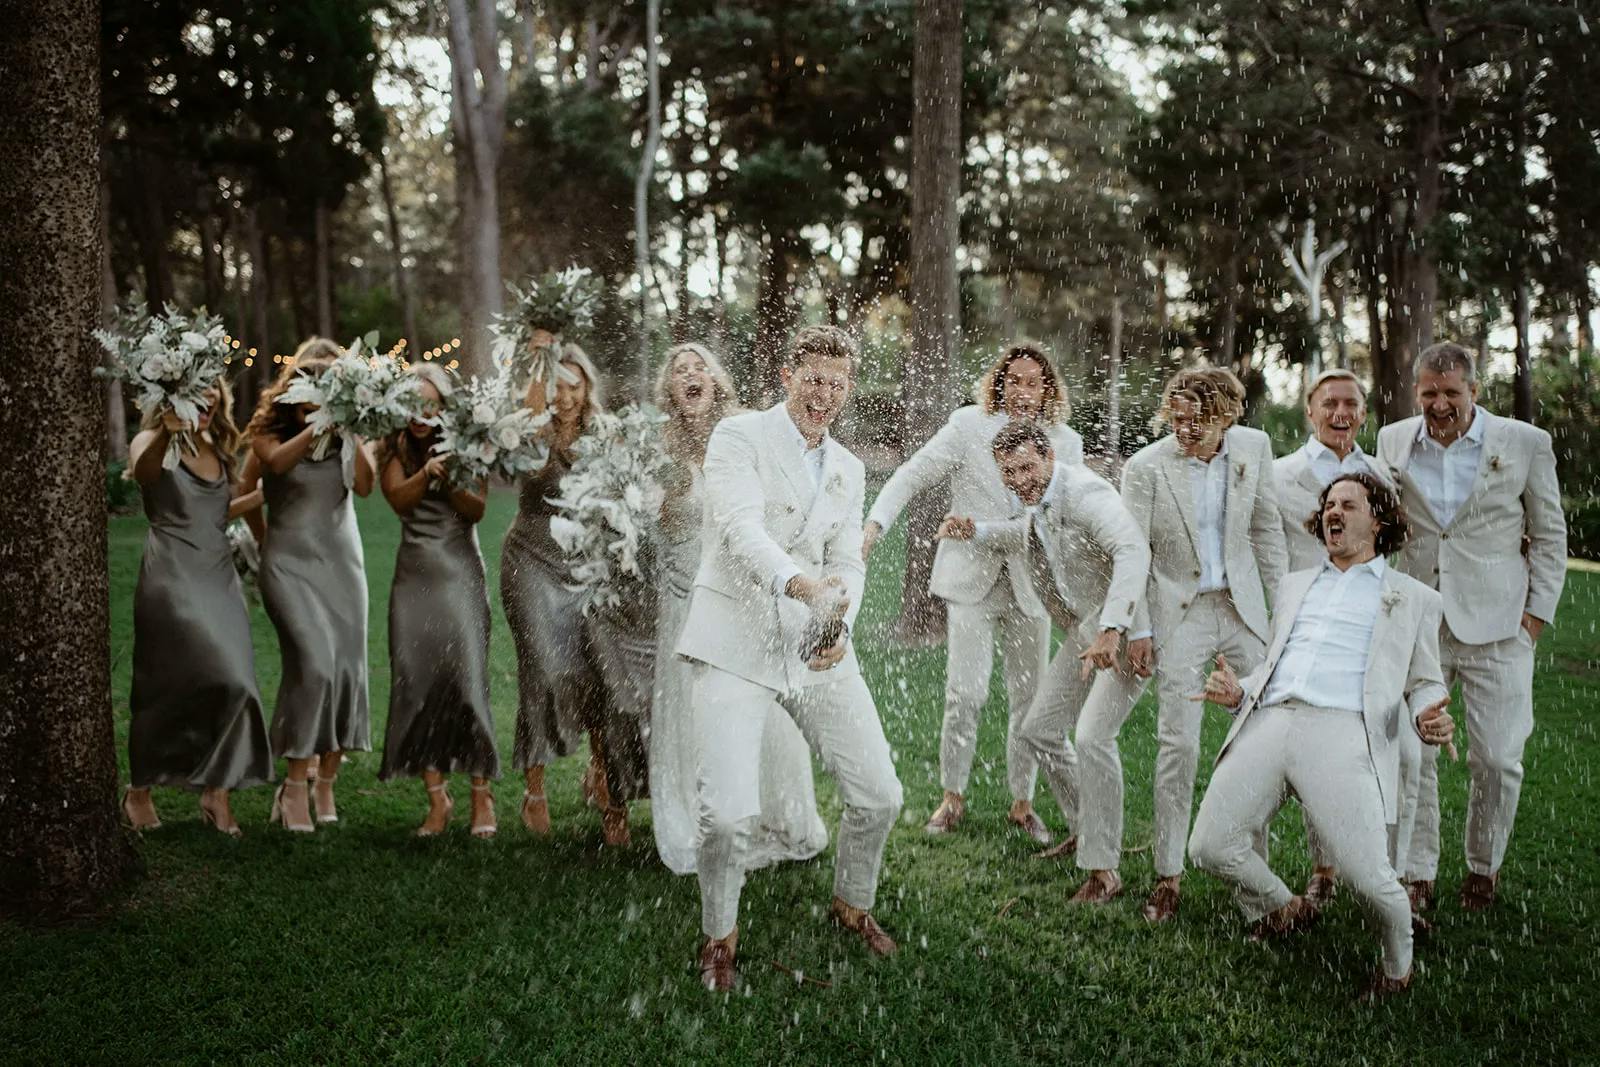 A group of people in formal attire are celebrating outdoors. A person in the center is popping a champagne bottle, causing champagne to spray. Others around them are laughing and reacting joyfully, with some shielding themselves from the spray. Trees are in the background.